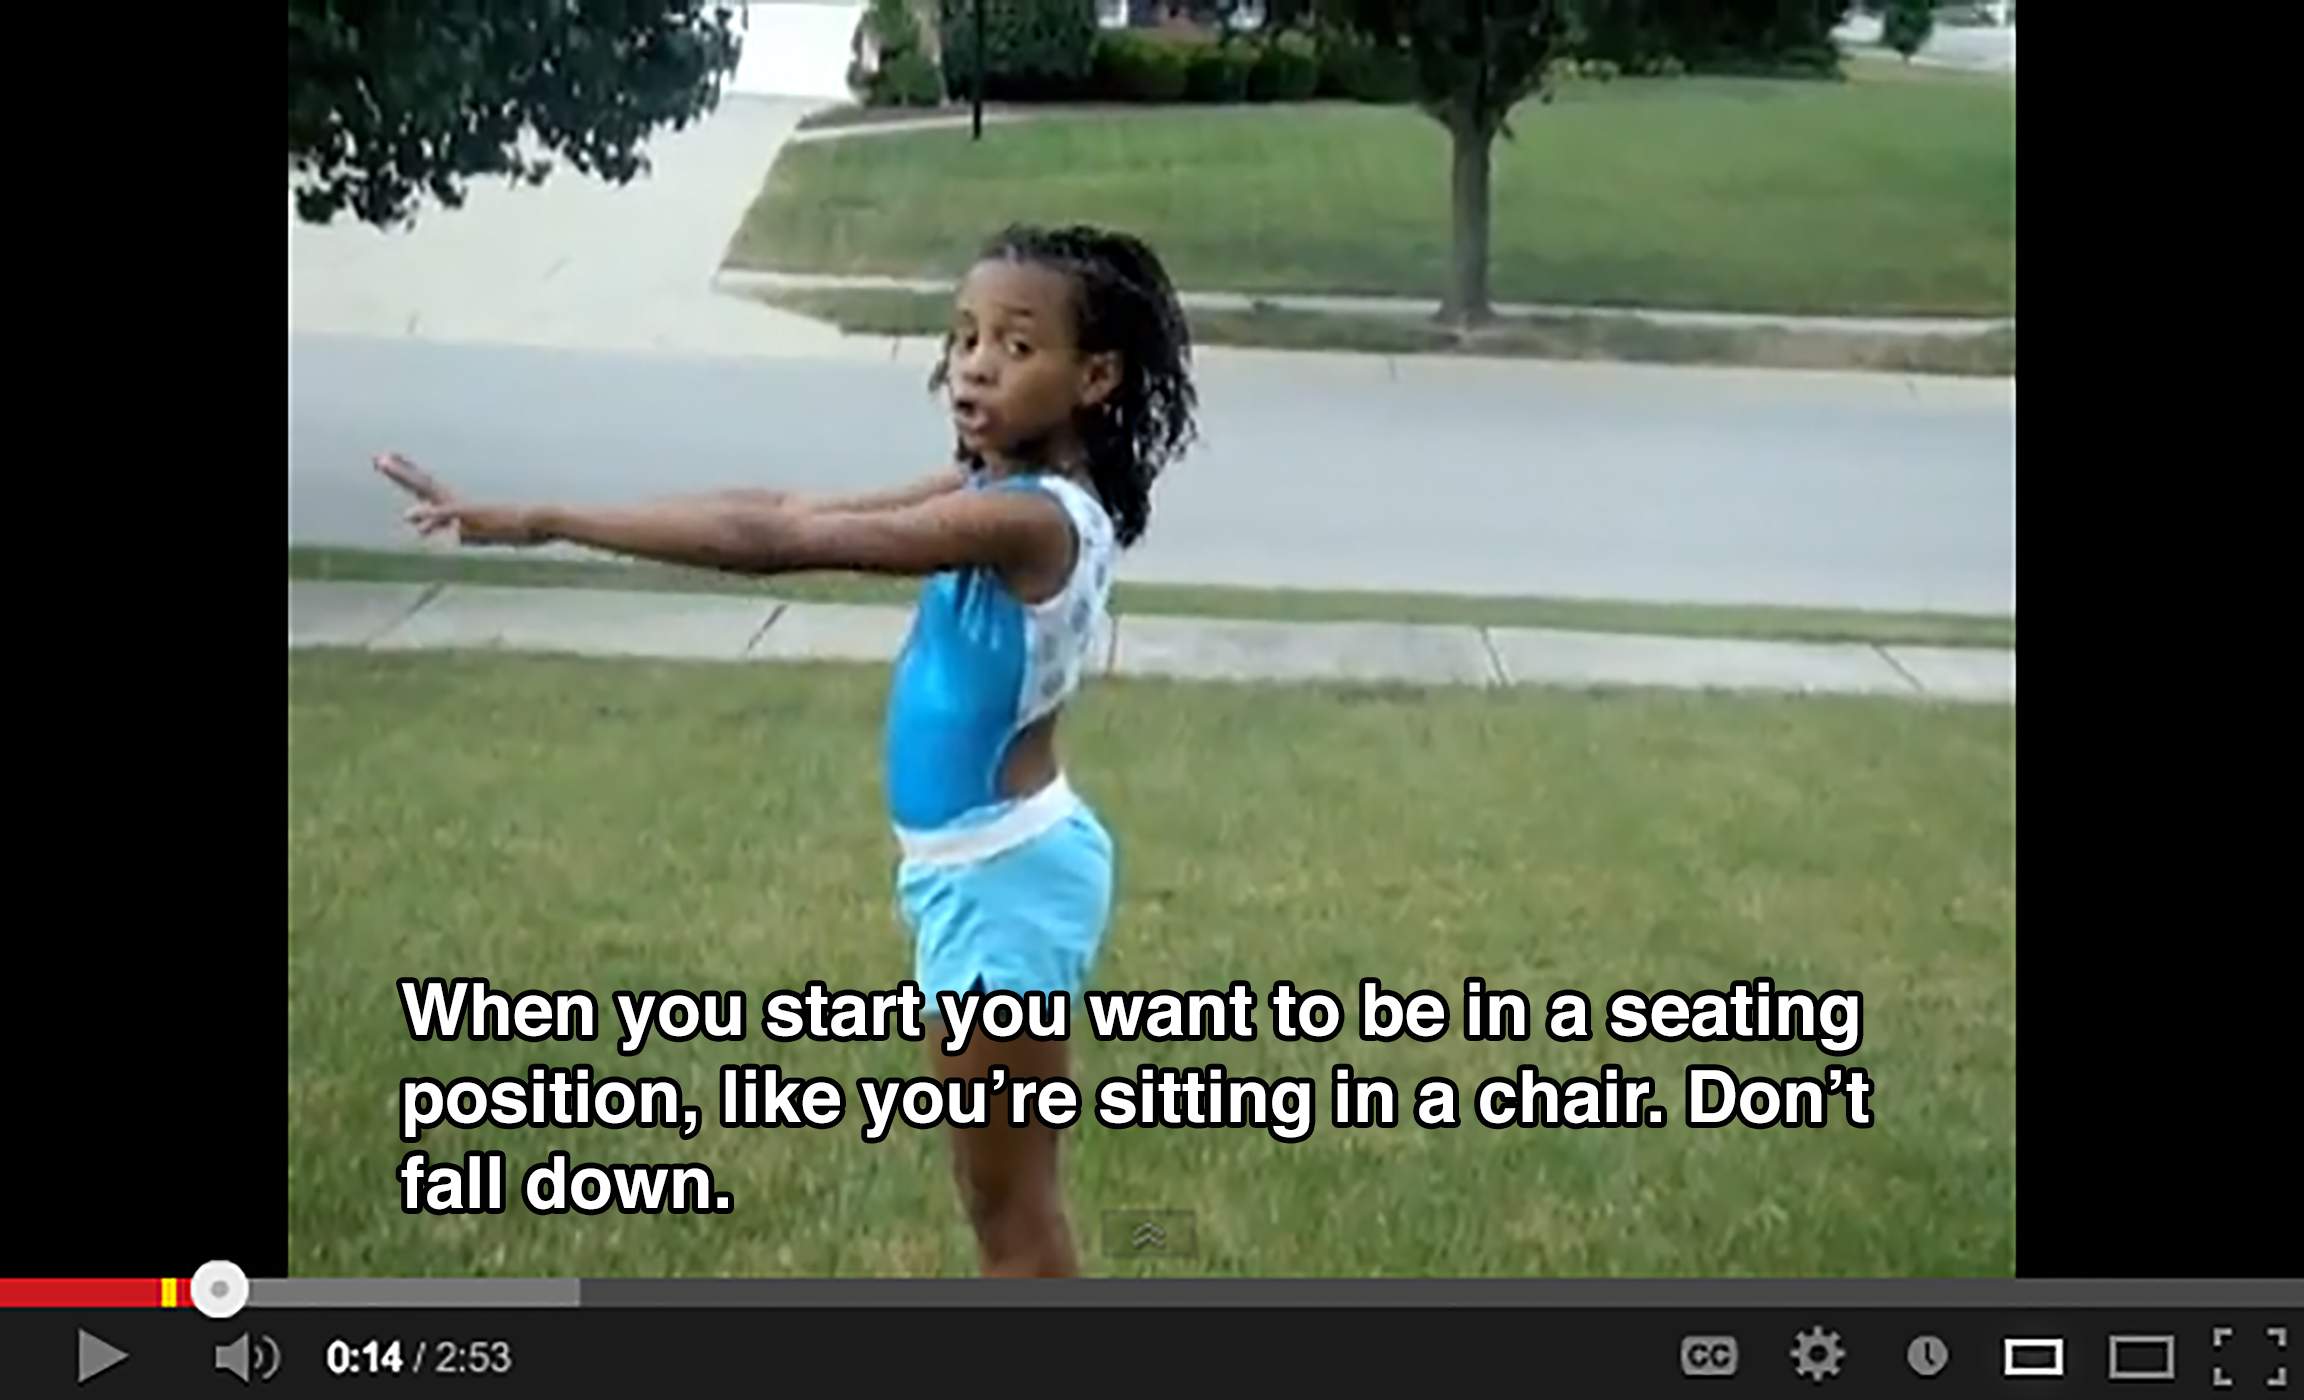 A young girl stands in a yard with her arms stretched outward and says: When you start you want to be in a seating positions, like you're sitting in a chair. Don't fall down.